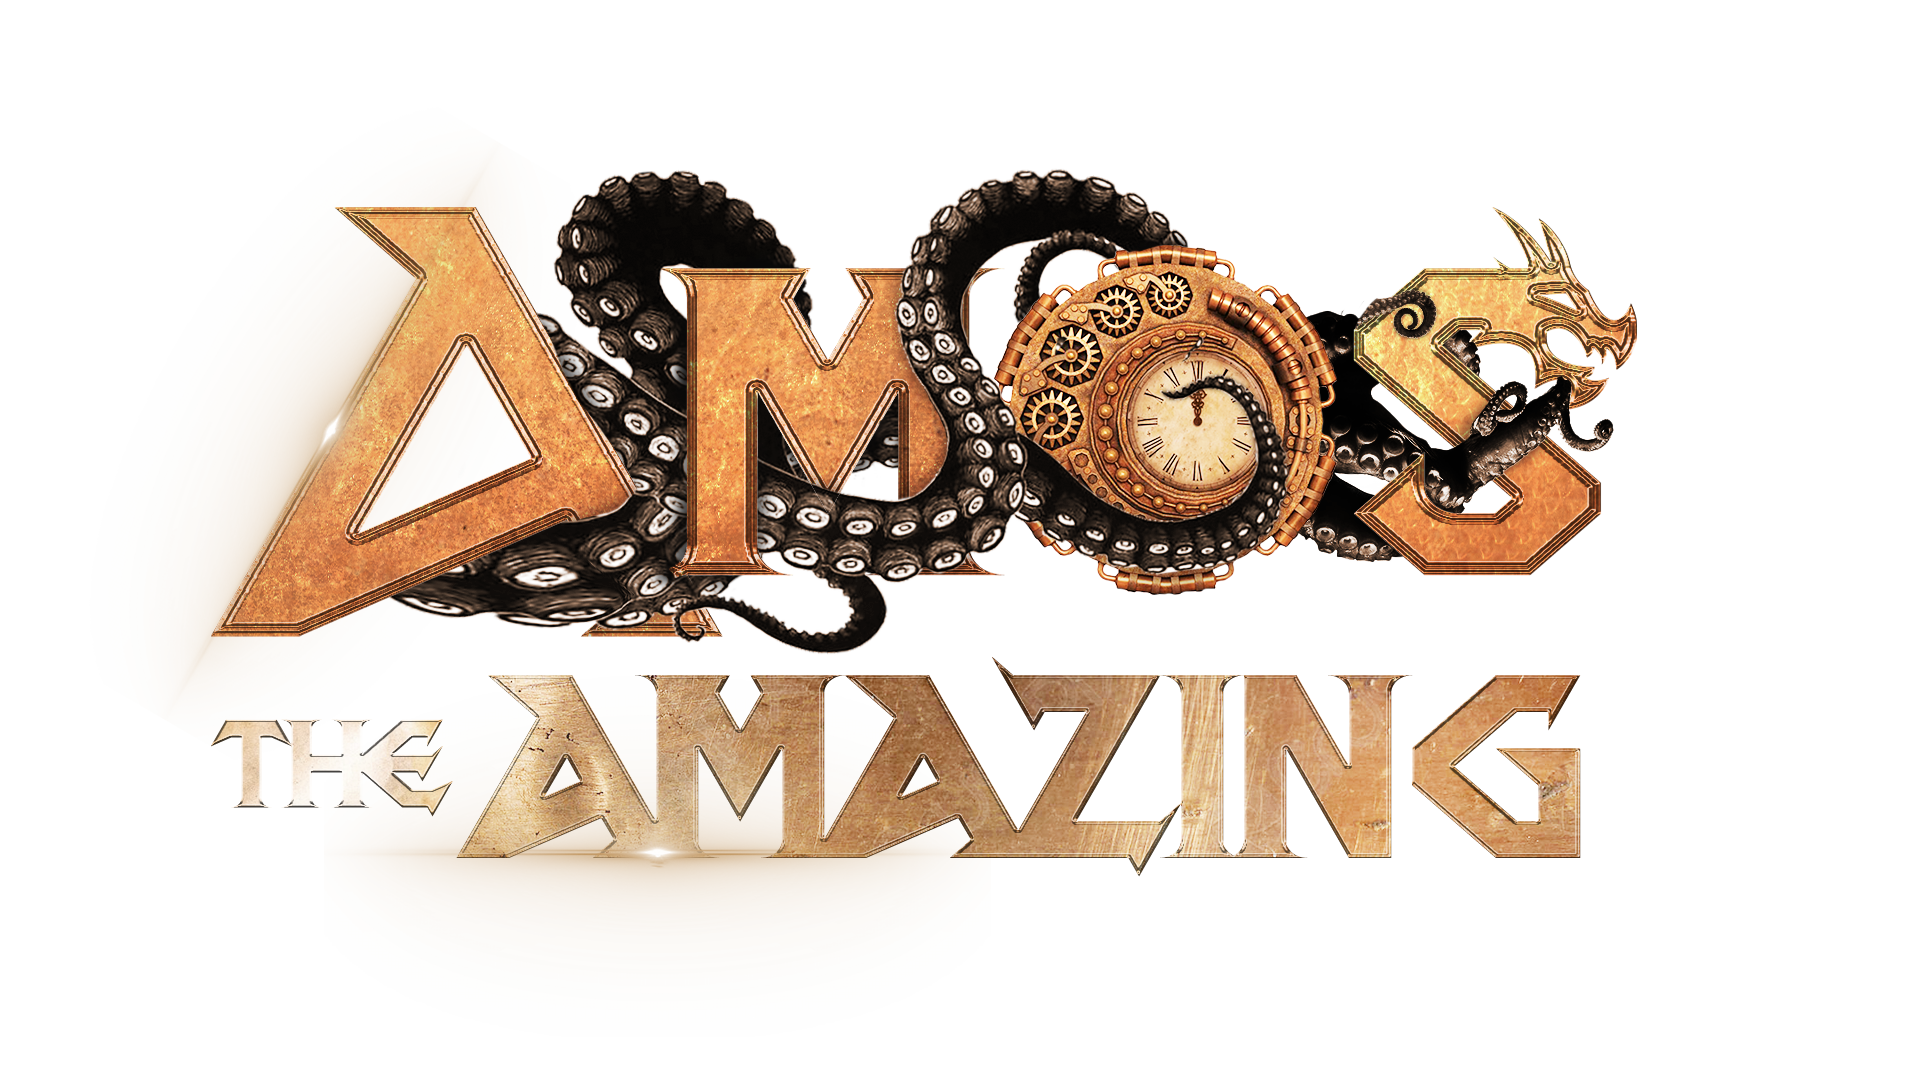 Amos the Amazing - coming soon to a bookstore near you.